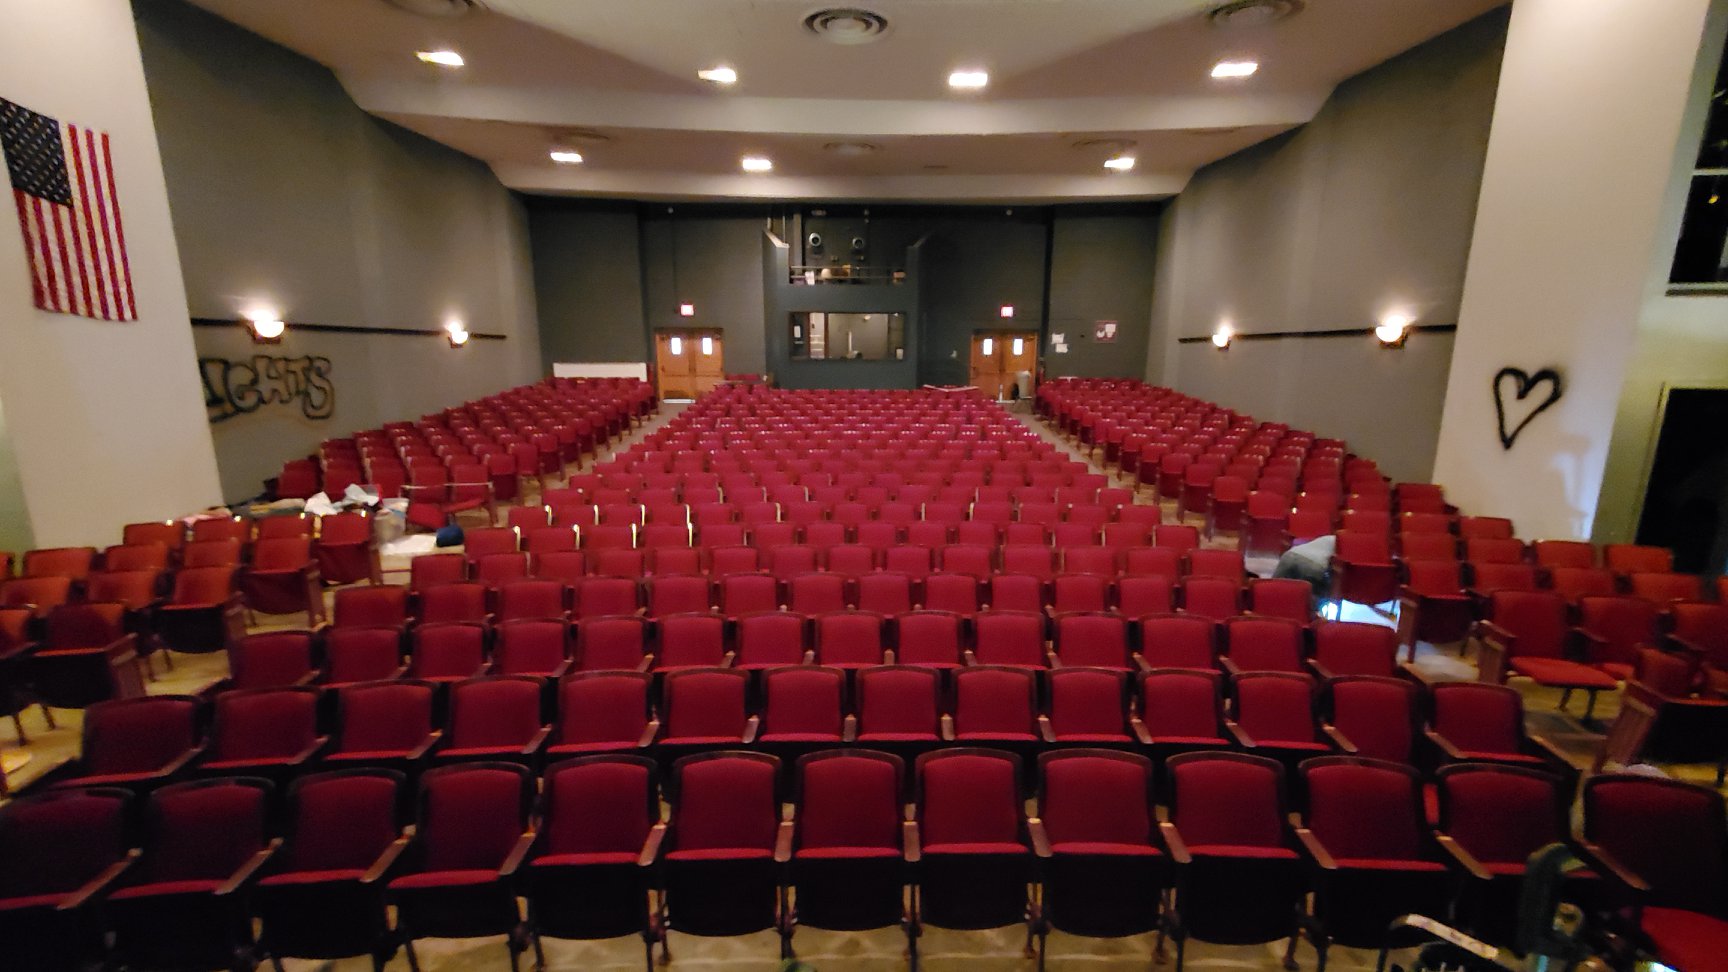 View from the stage of an empty theater. The theater seats are red and upholstered. There are three sections, and they are positioned to be slightly curved toward the stage. Photo from the PACA Facebook page.